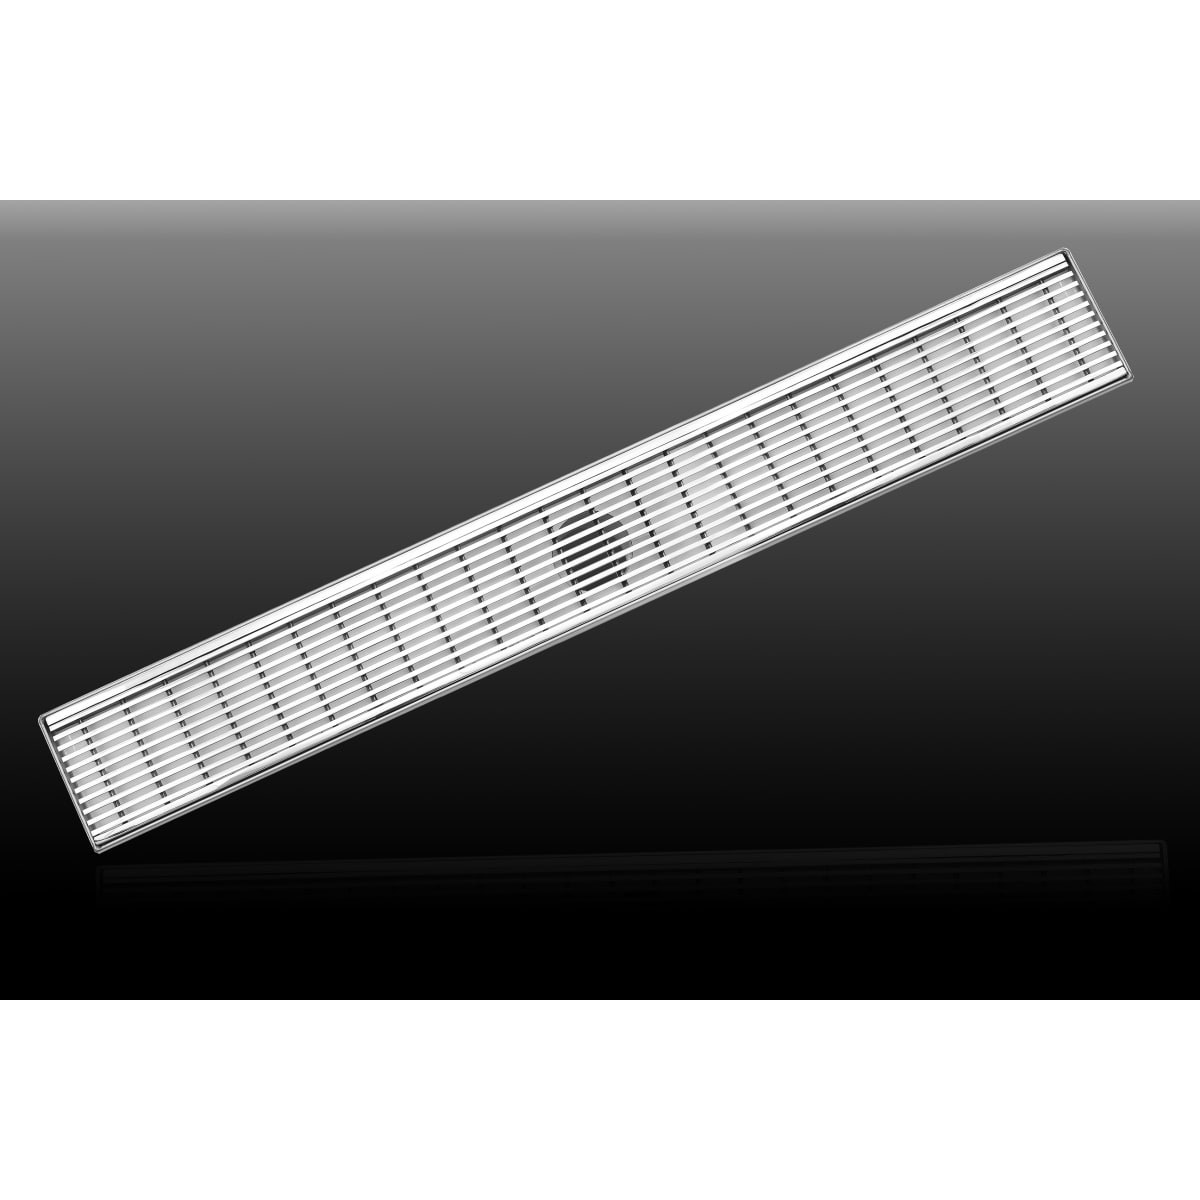 LUXE Linear Shower Drain 40 inch Satin Stainless Steel no cover/grate; gS